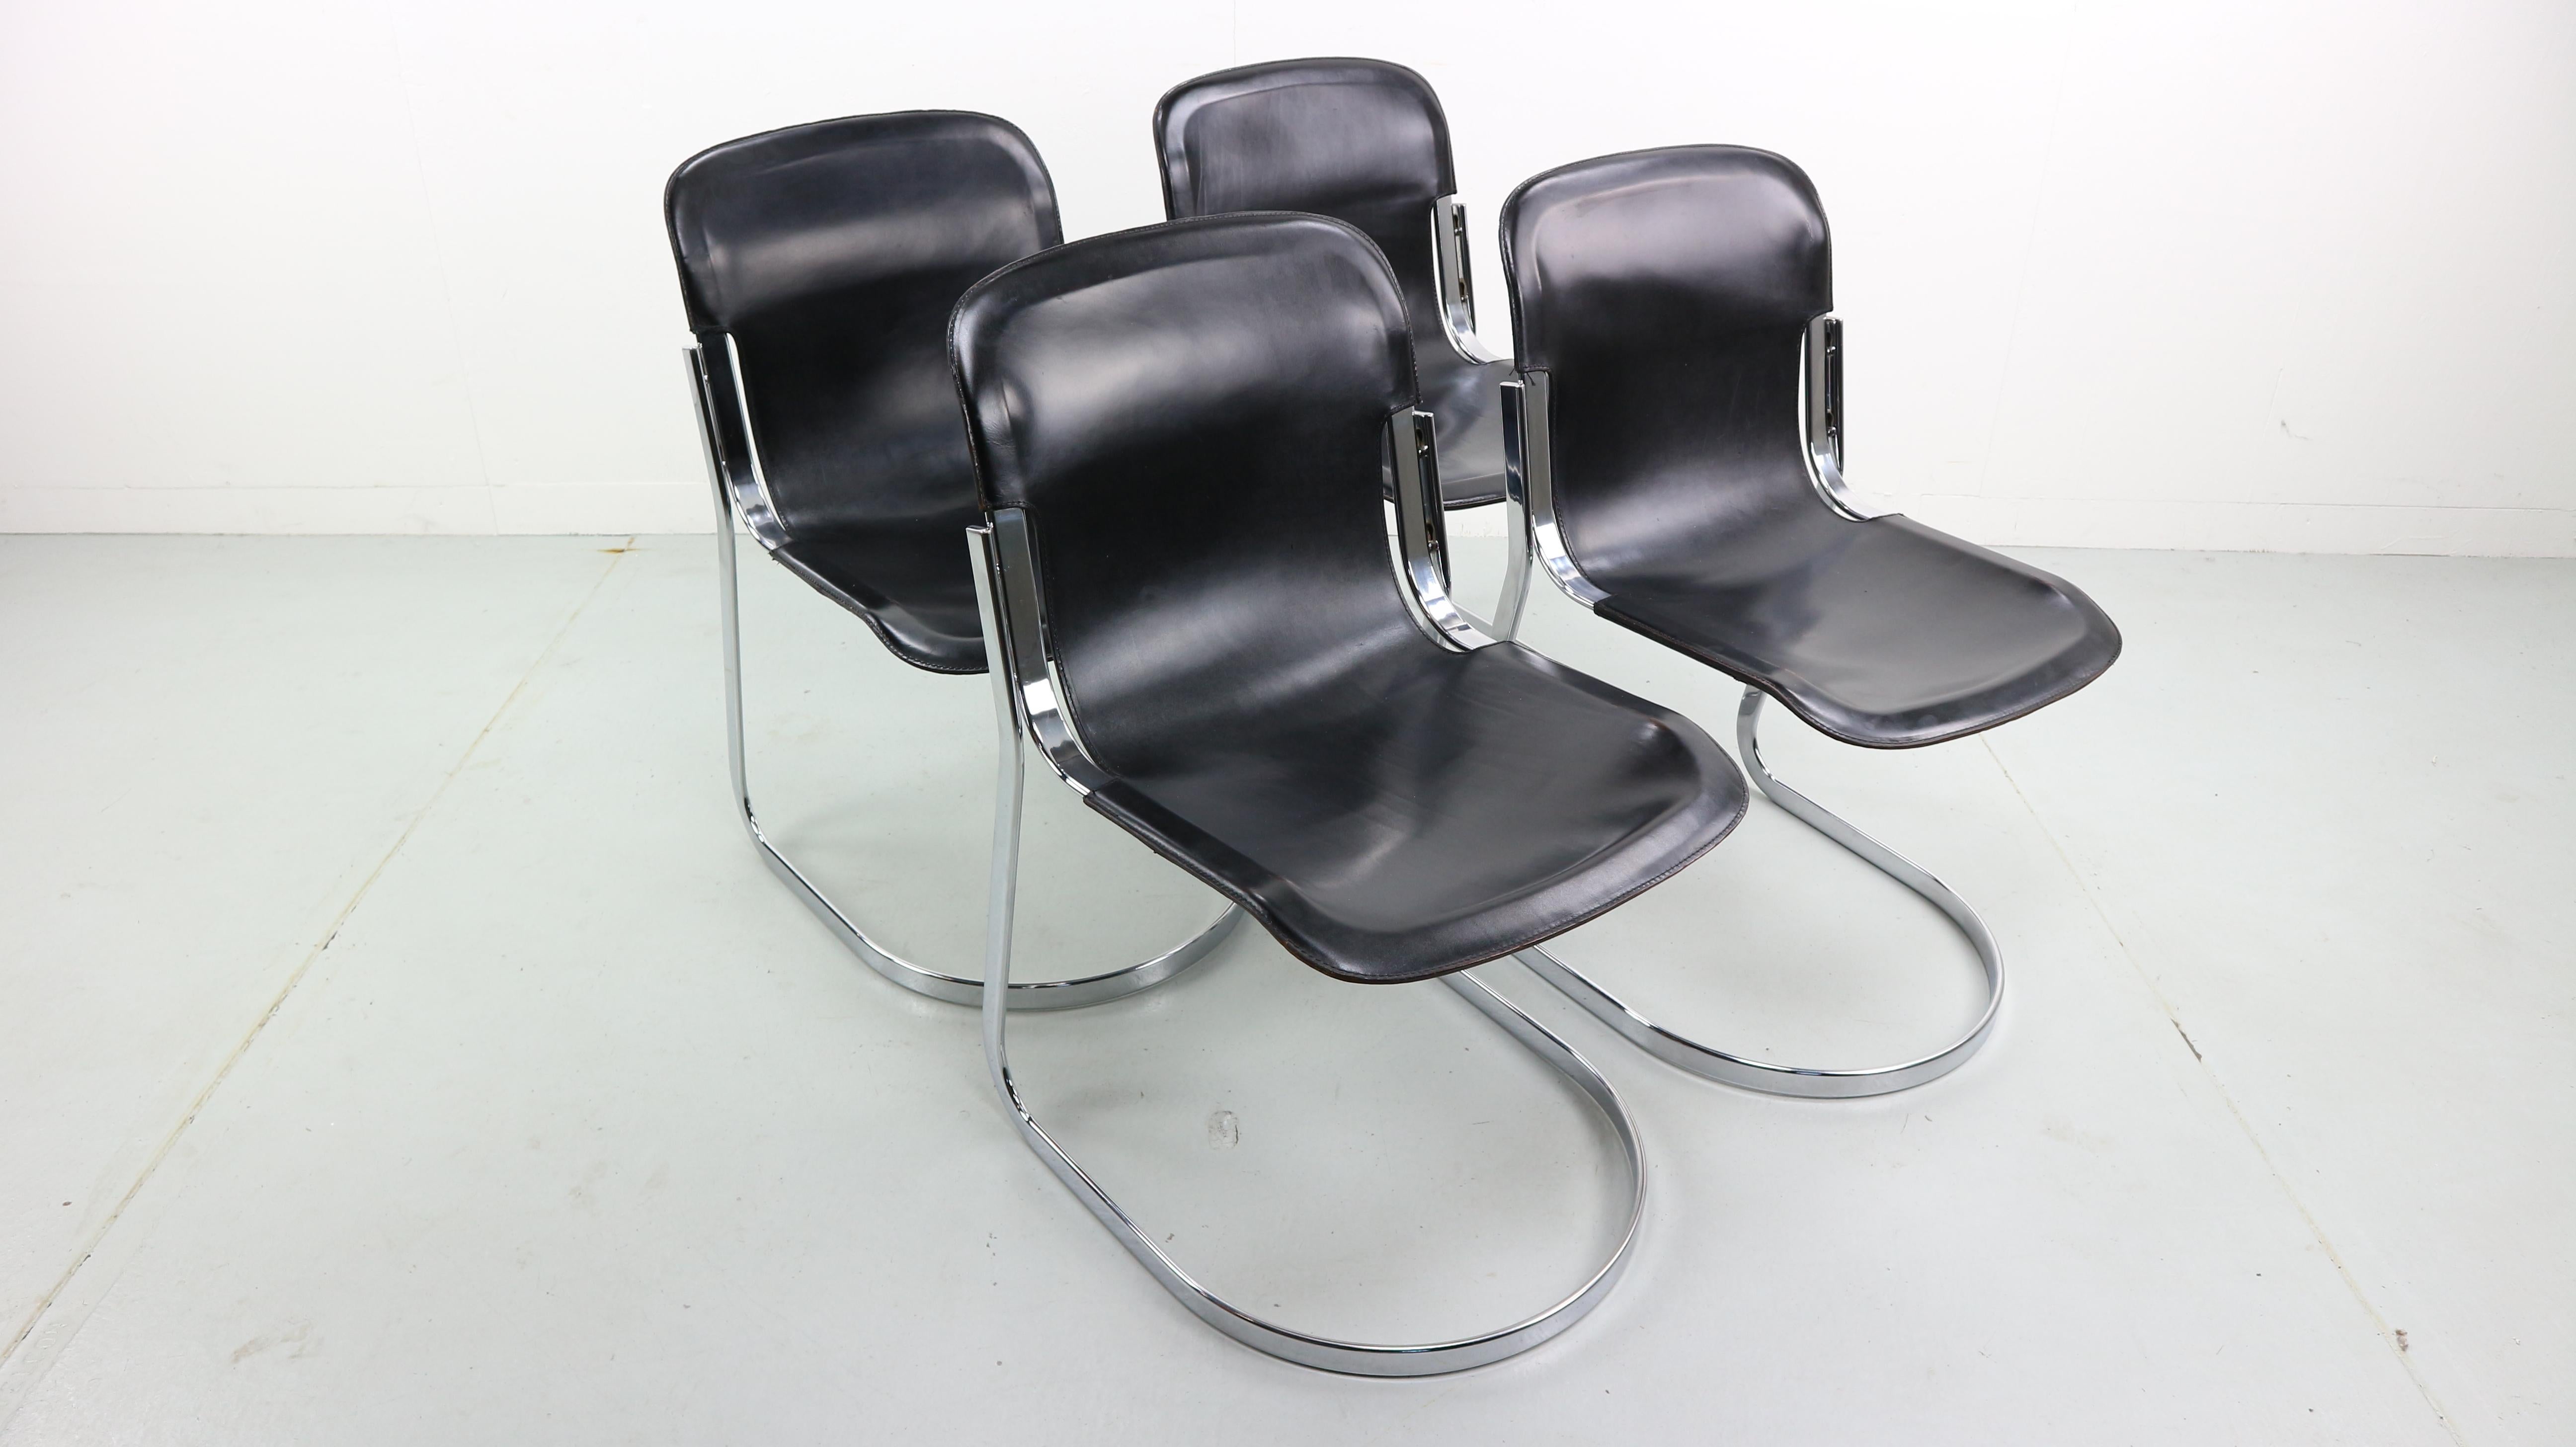 Set of four Italian Cidue dining chairs (model C2) from the 1970s designed by Willy Rizzo. These cantilever chairs have a flat chromed tubular steel frame and are covered with high quality black saddle leather.